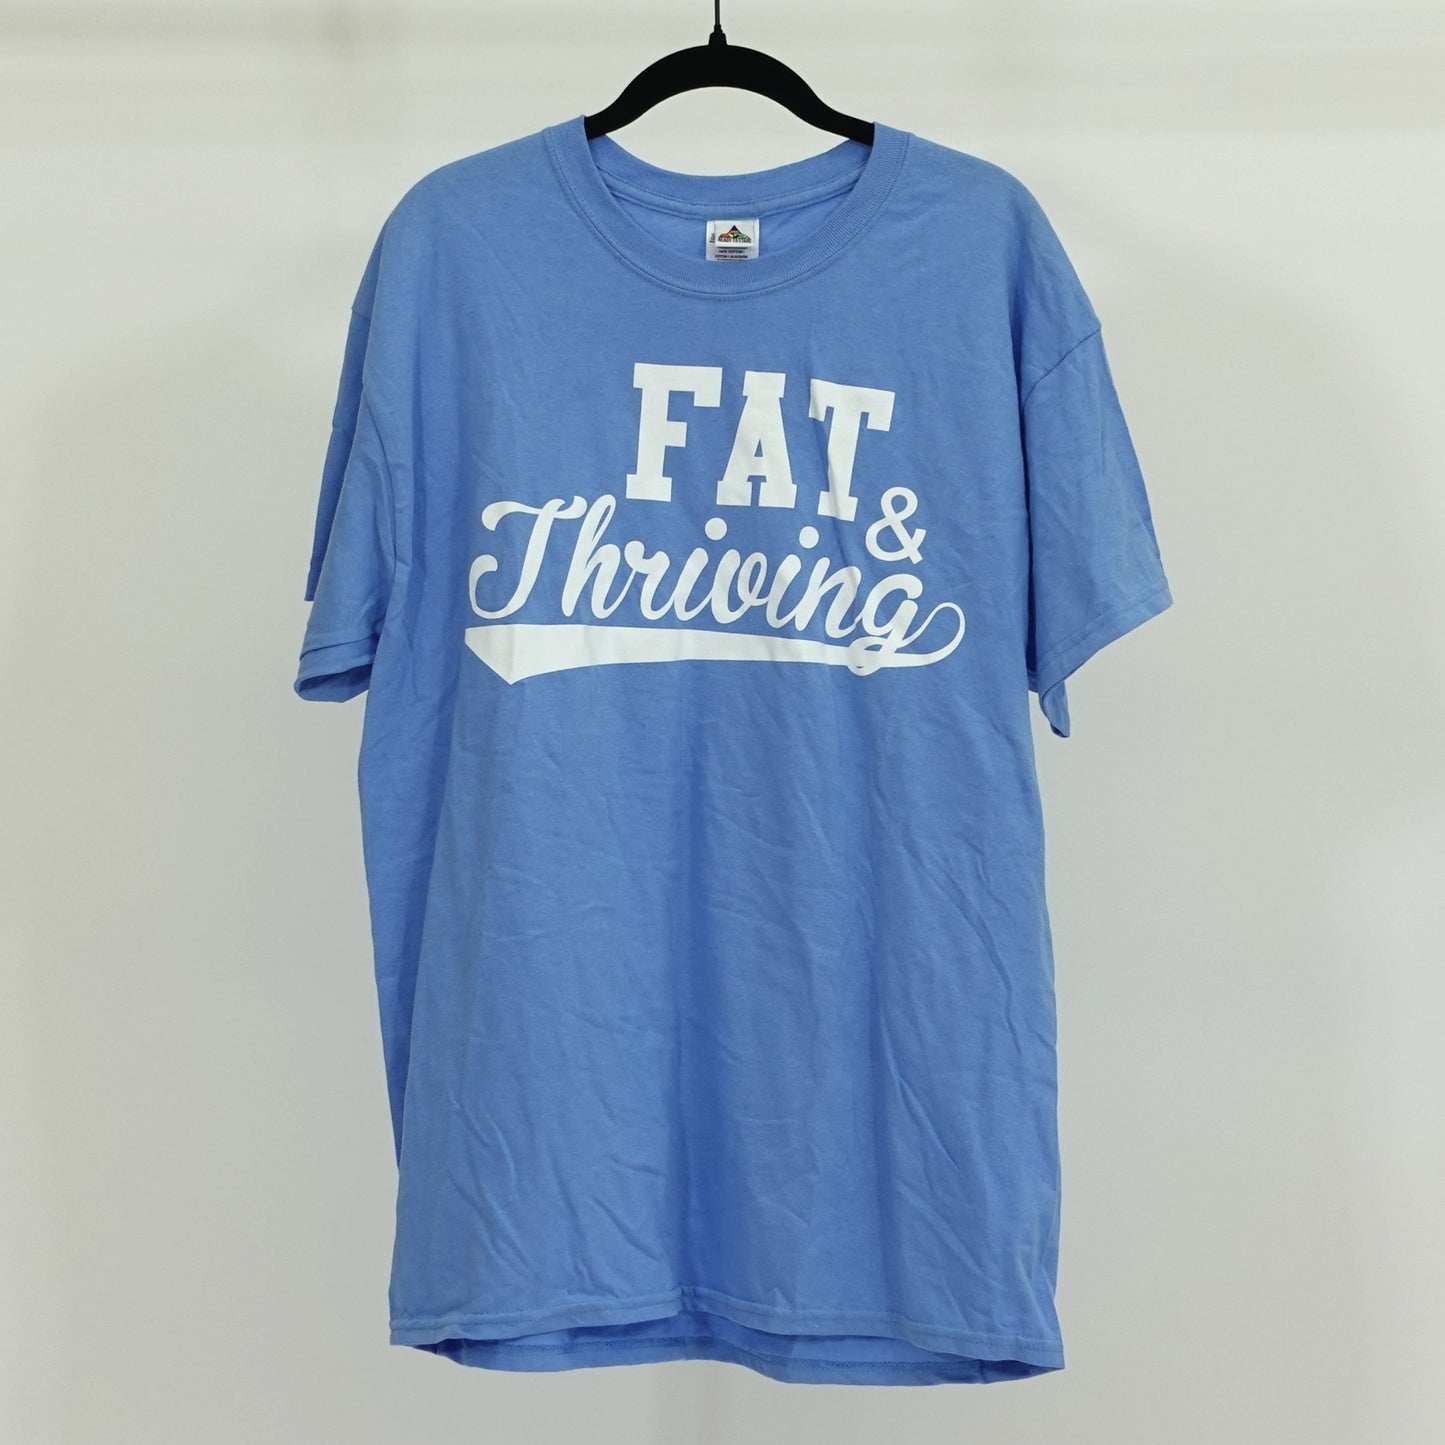 Fat & Thriving Graphic Tee